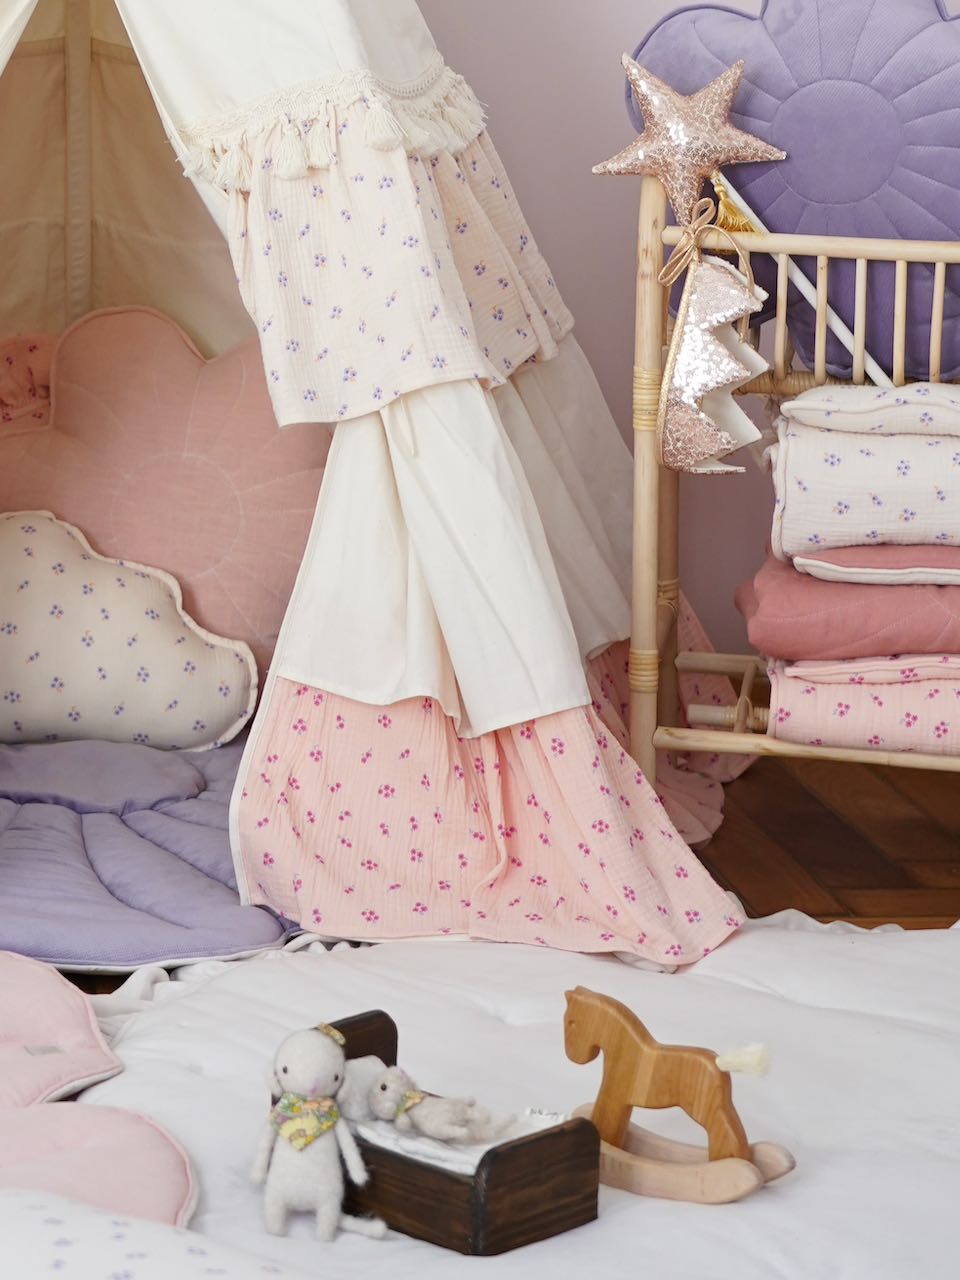 "Forget-me-not" Teepee Tent with Frills